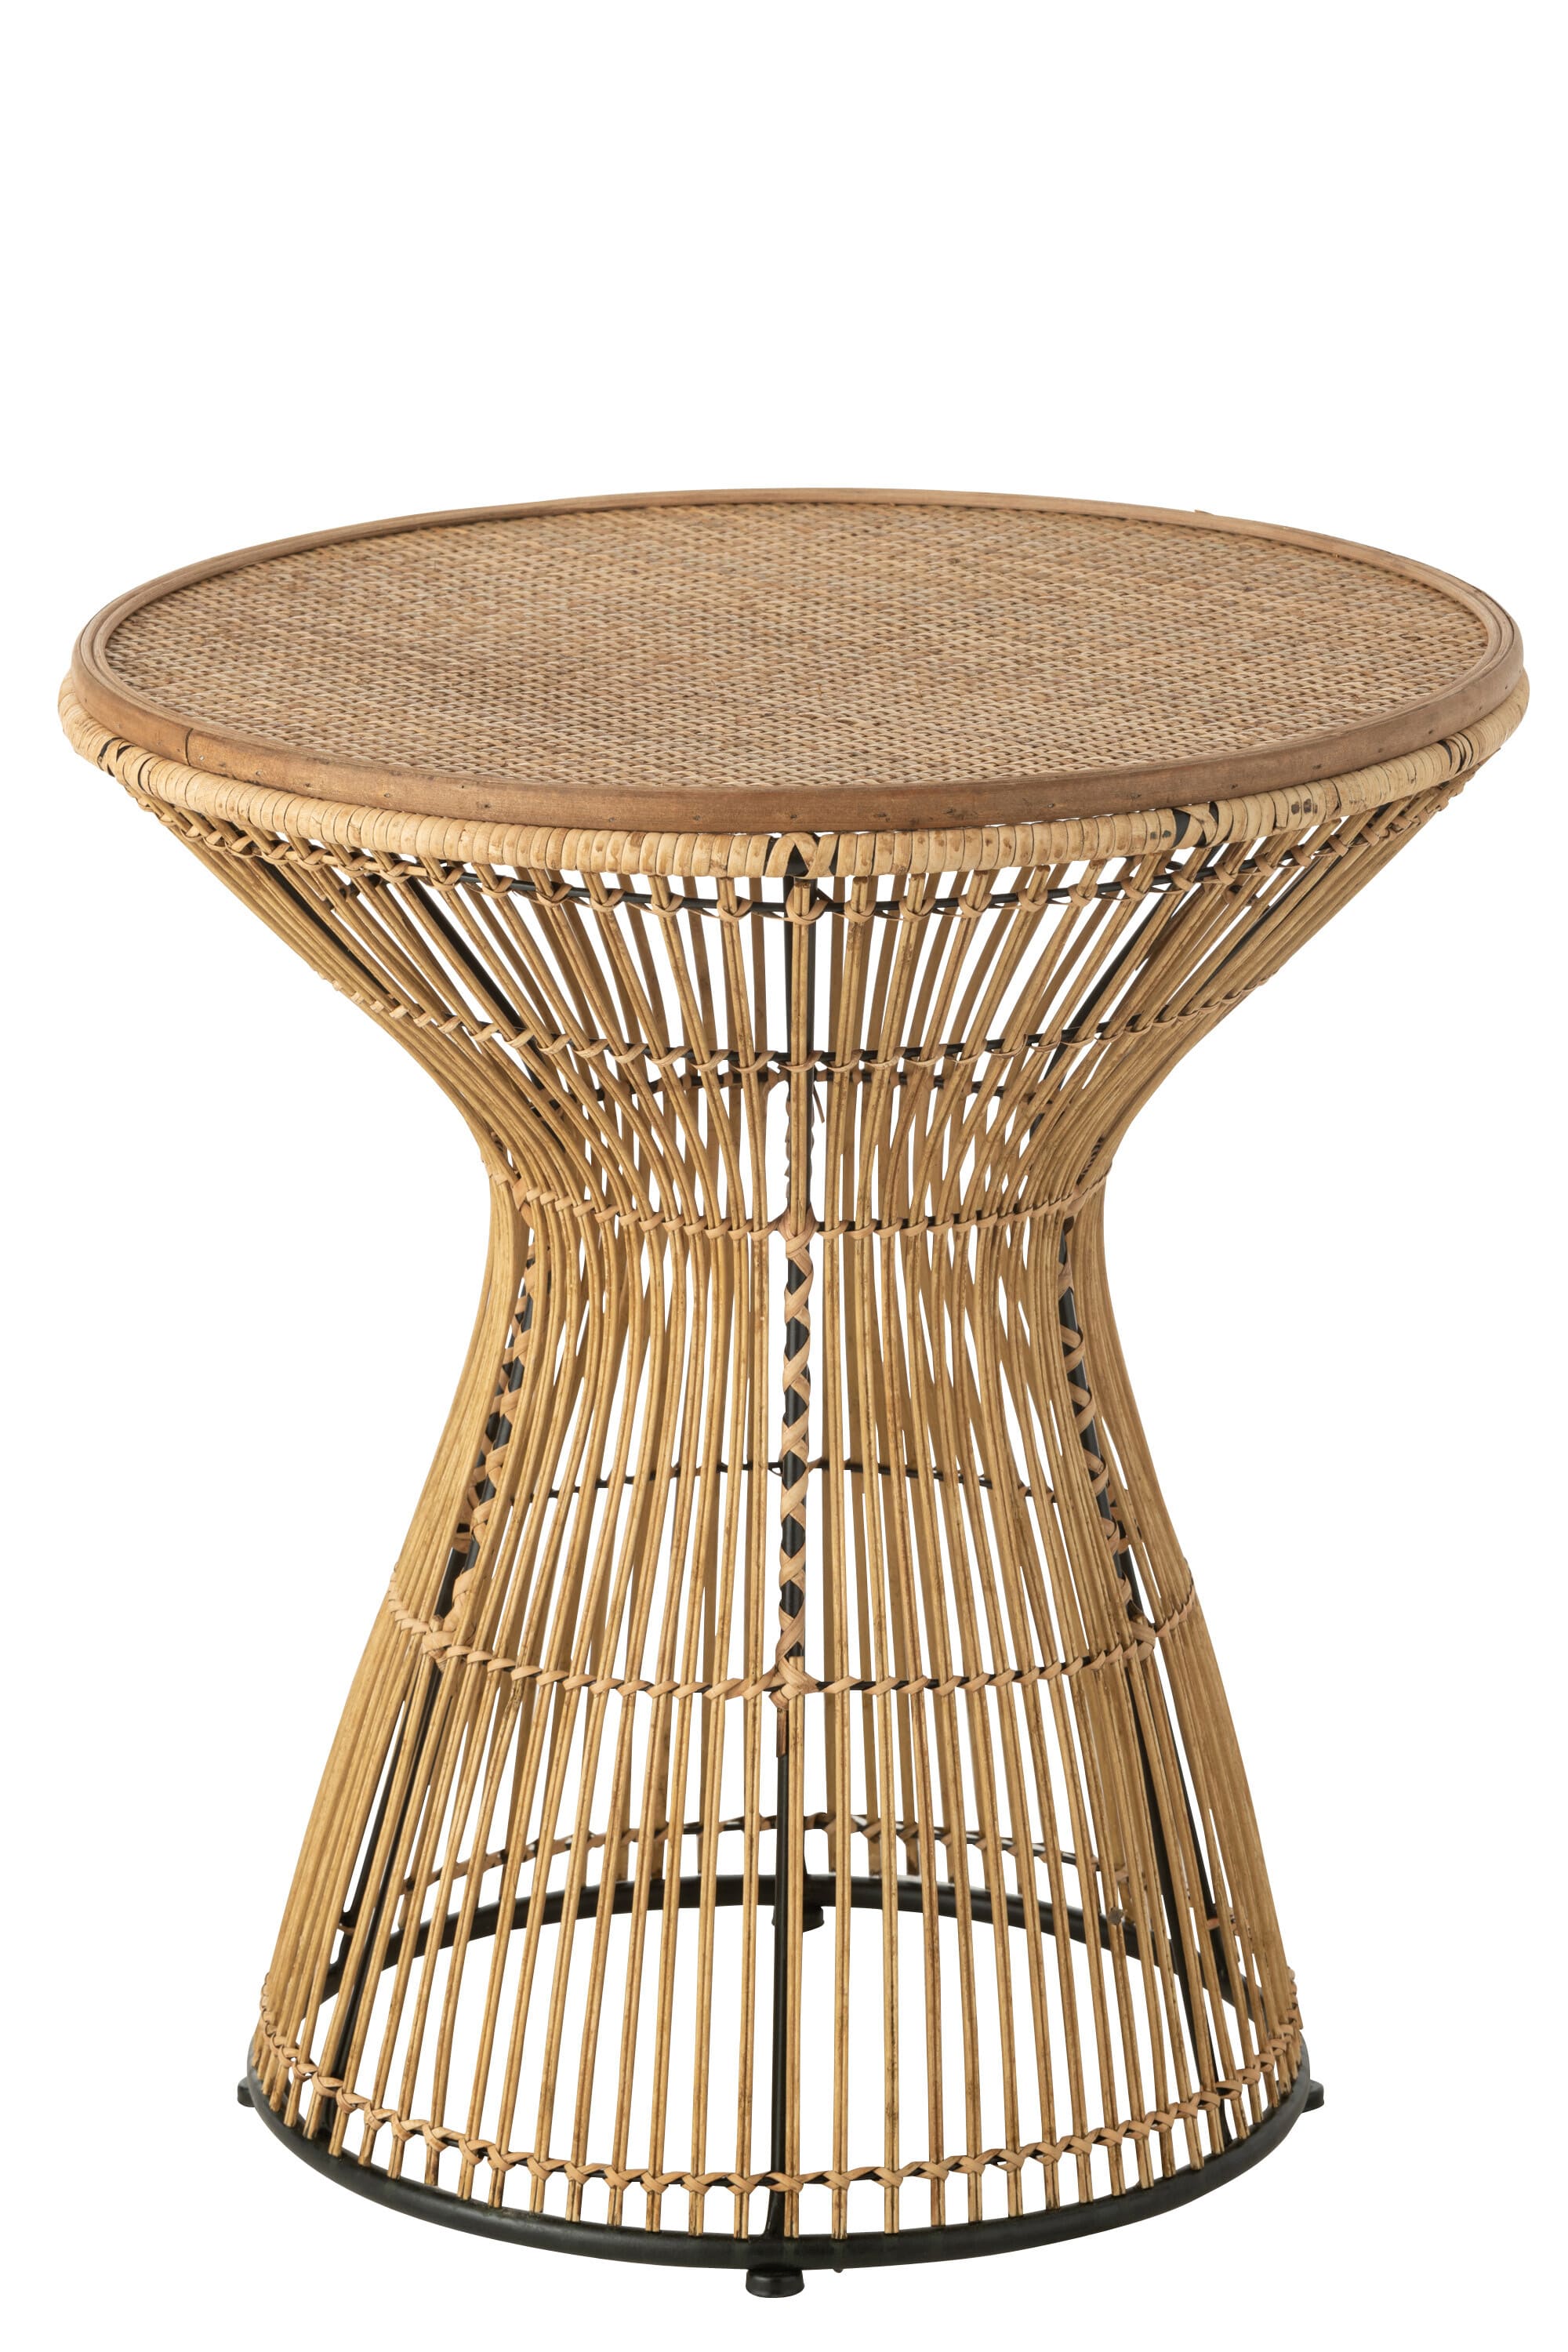 Petite-Table-d_Appoint-Rotin-interieur